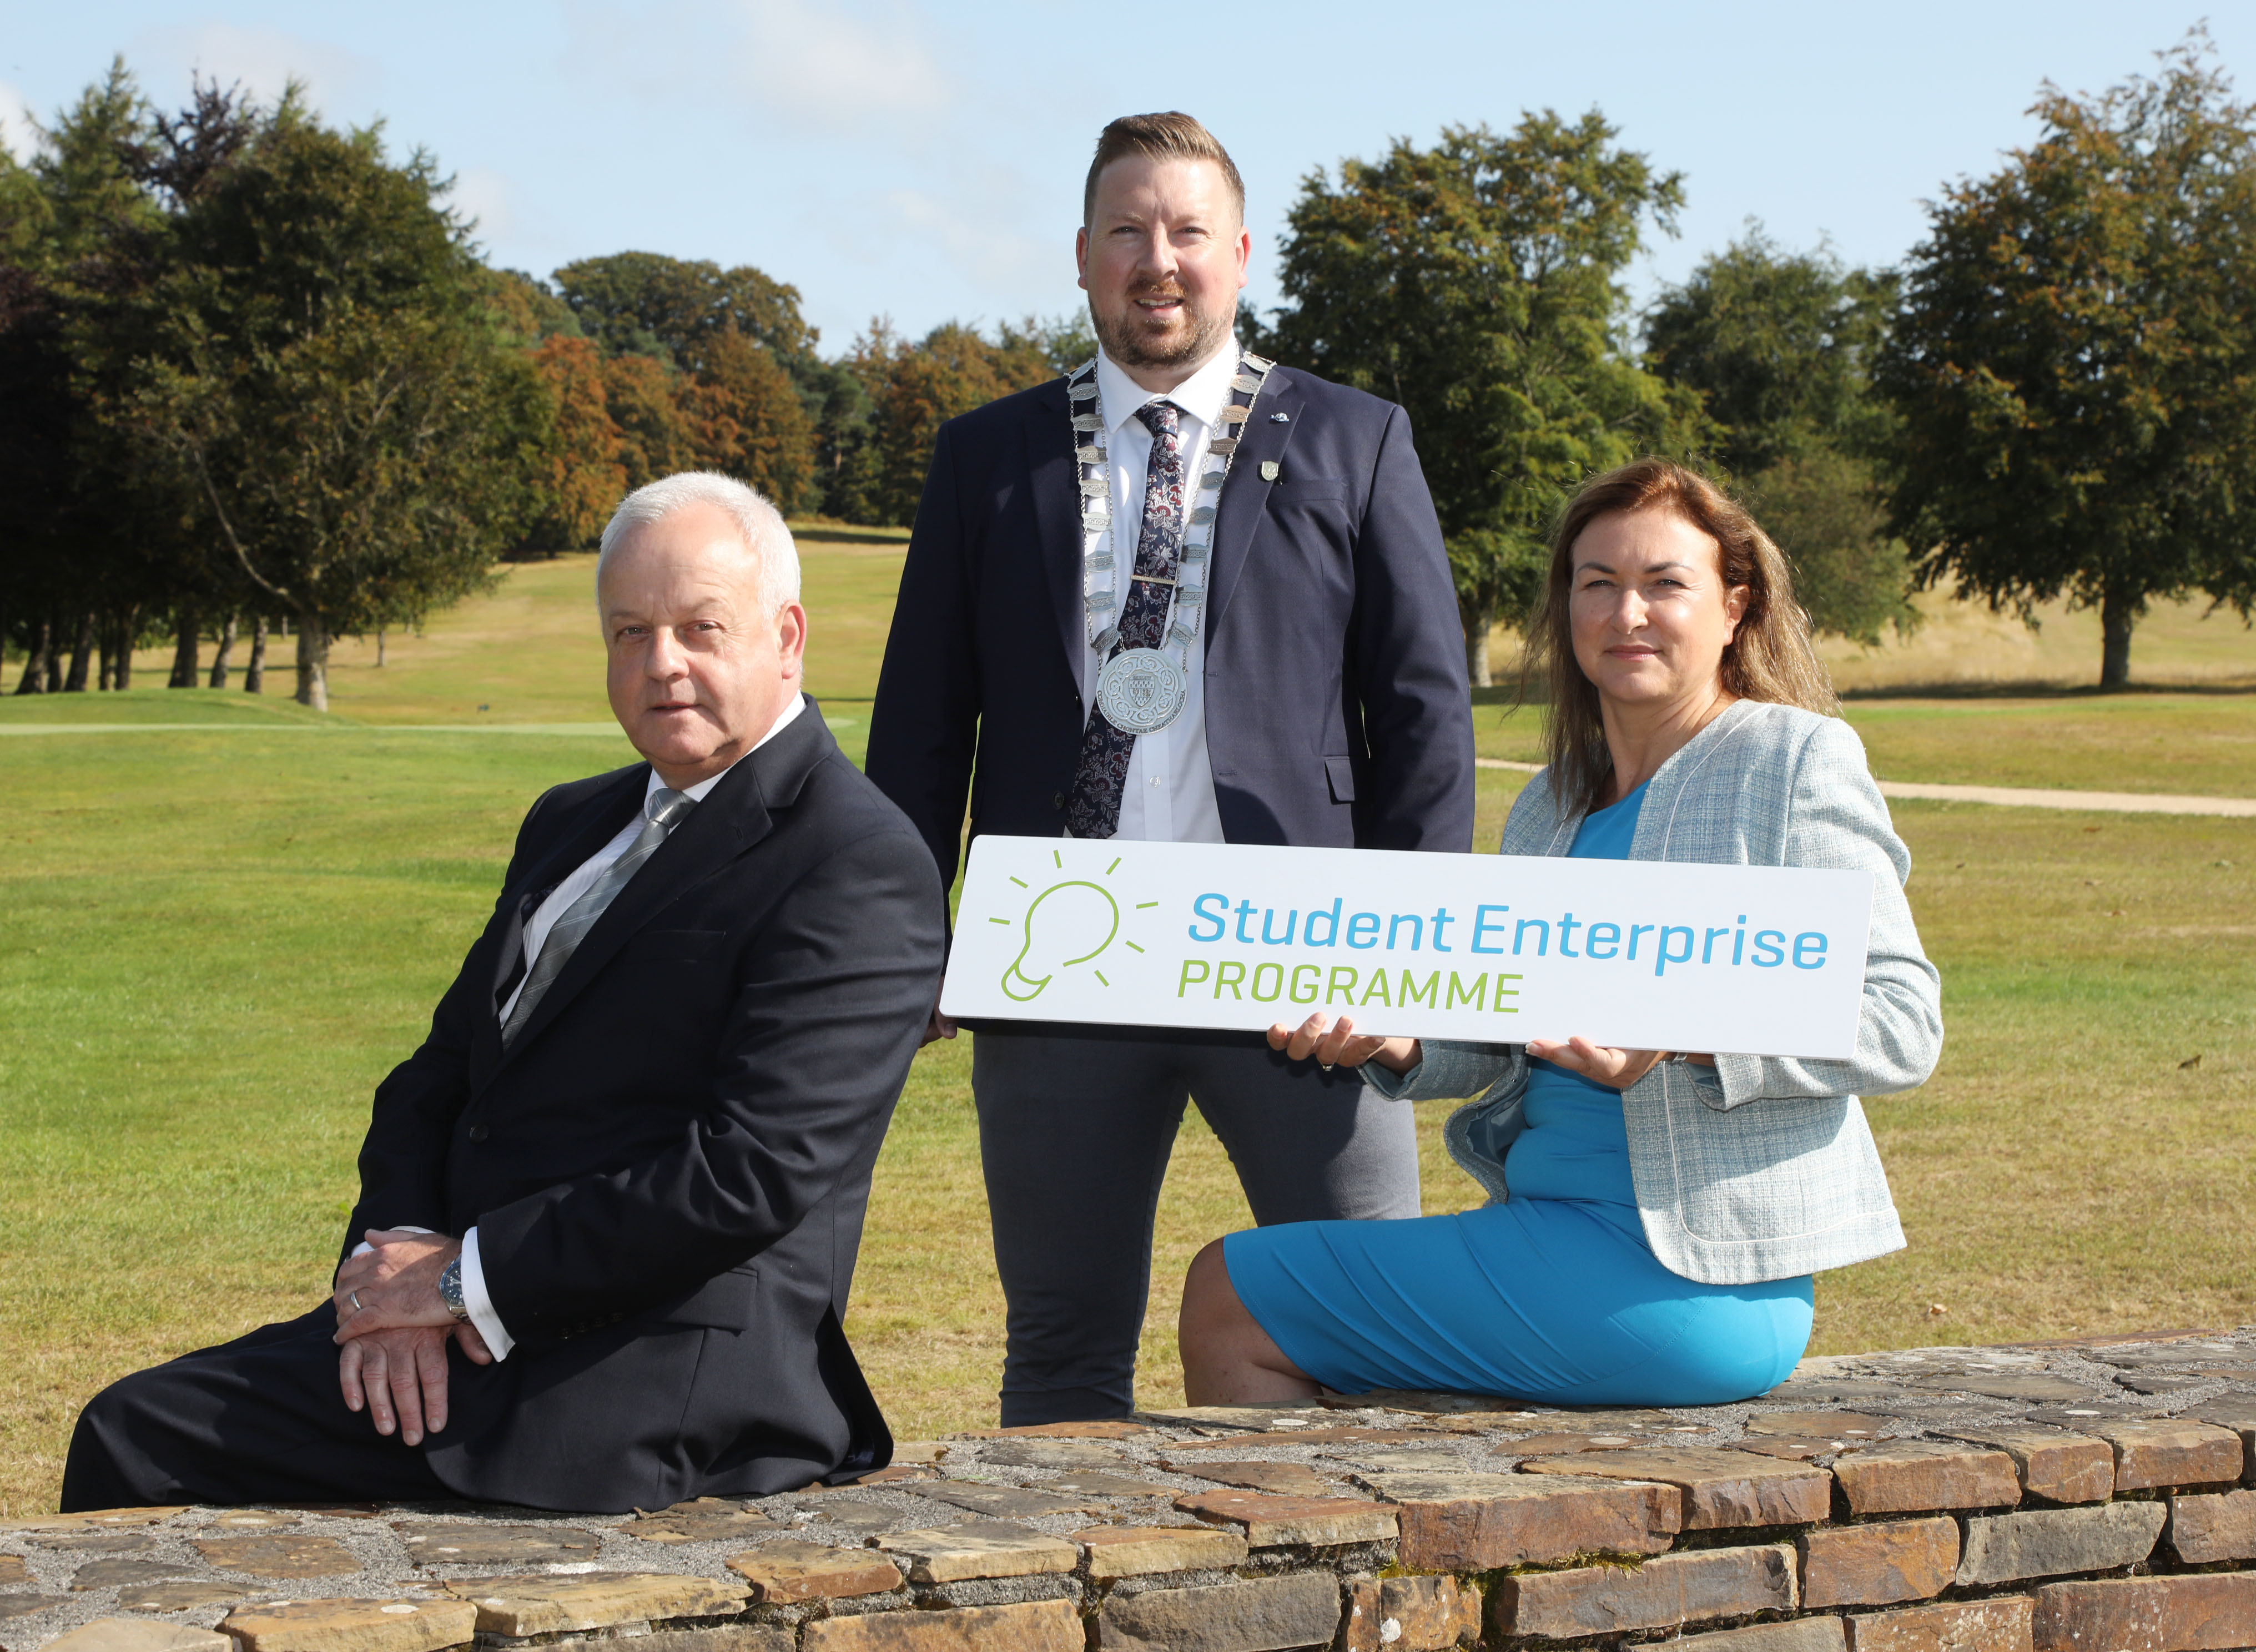 COUNTY CARLOW SCHOOLS ENCOURAGED TO SIGN UP FOR IRELAND’S LARGEST ENTERPRISE PROGRAMME